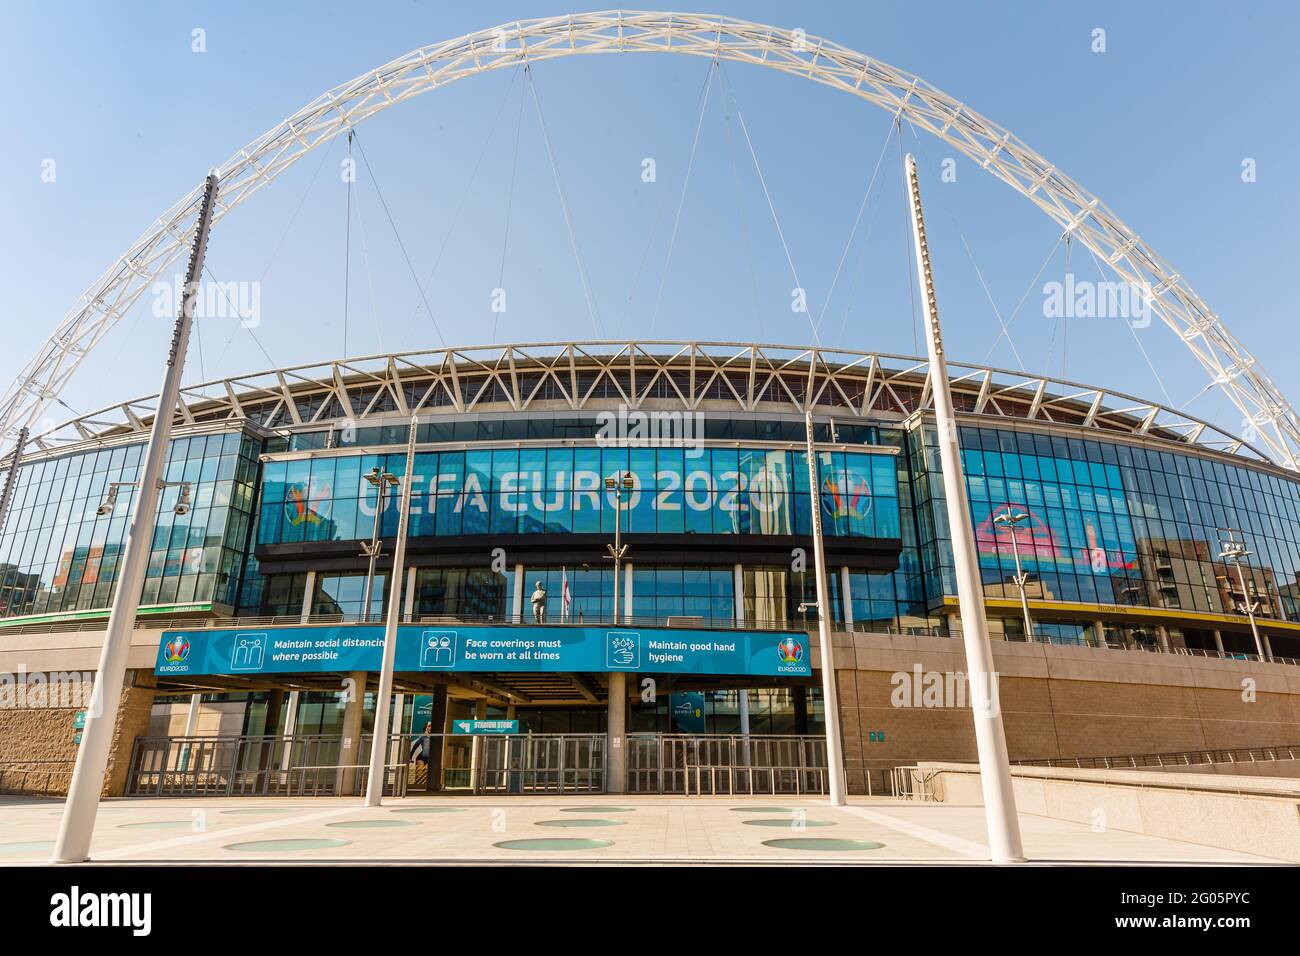 Wembley Stadium, Wembley Park, UK. 1st June 2021.   Postponed by the Coronavirus pandemic, Wembley is finally starting to take shape for the Euro 2020 - UEFA European Football Championship with Wembley Stadium's display now showing the Euro 2020 logo and artwork.   Gareth Southgate is set to confirm his 26-man England squad ahead of UEFA deadline this evening.  Amanda Rose/Alamy Live News Stock Photo